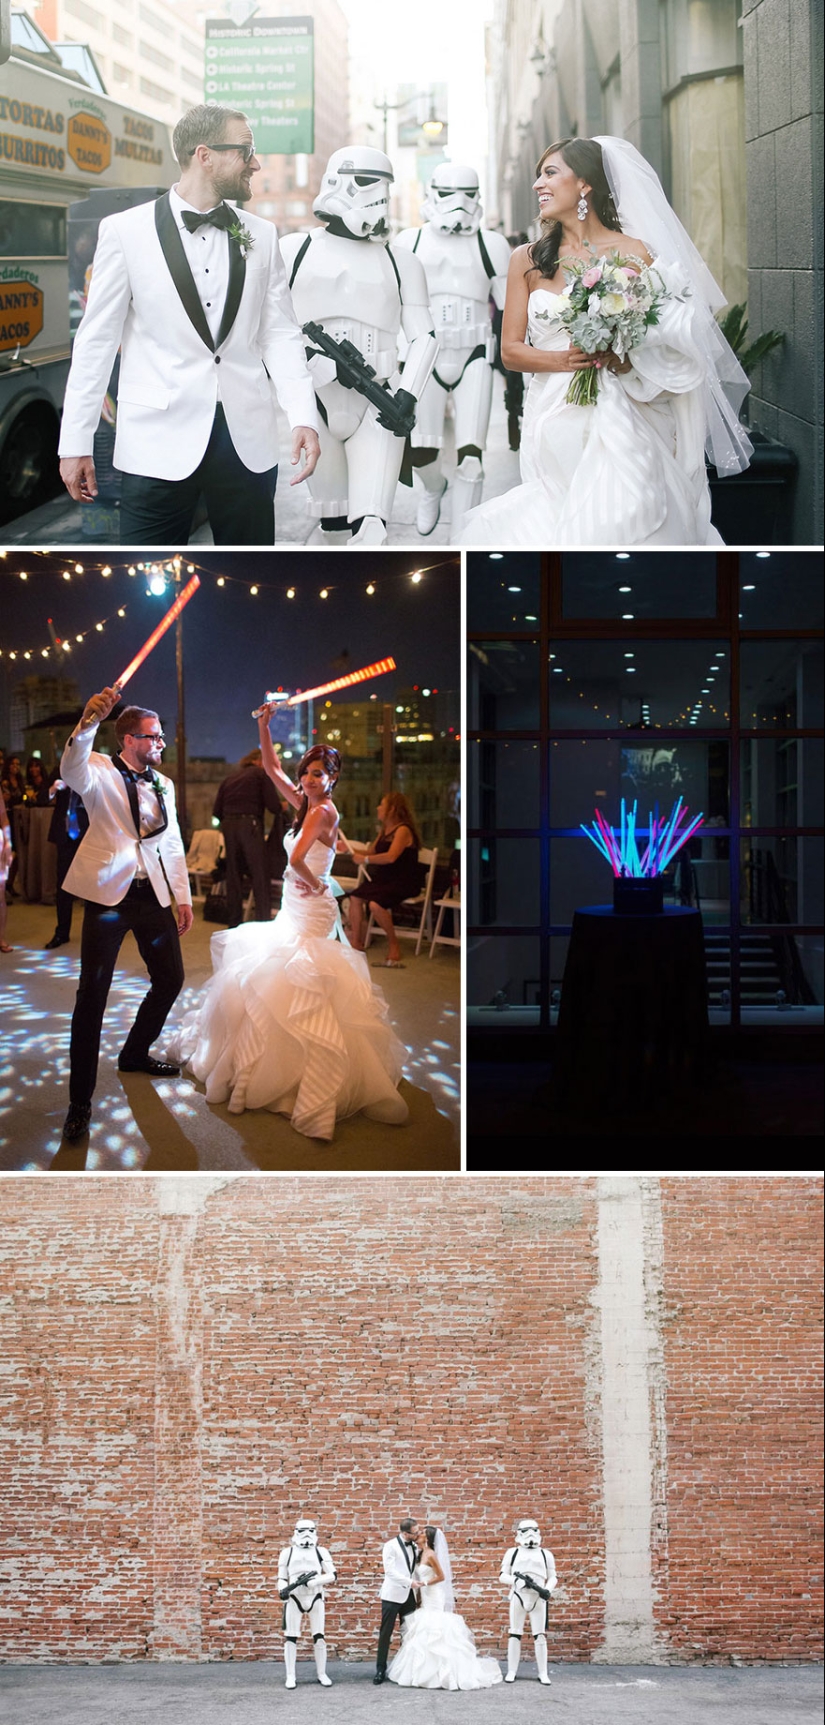 The 16 coolest themed weddings